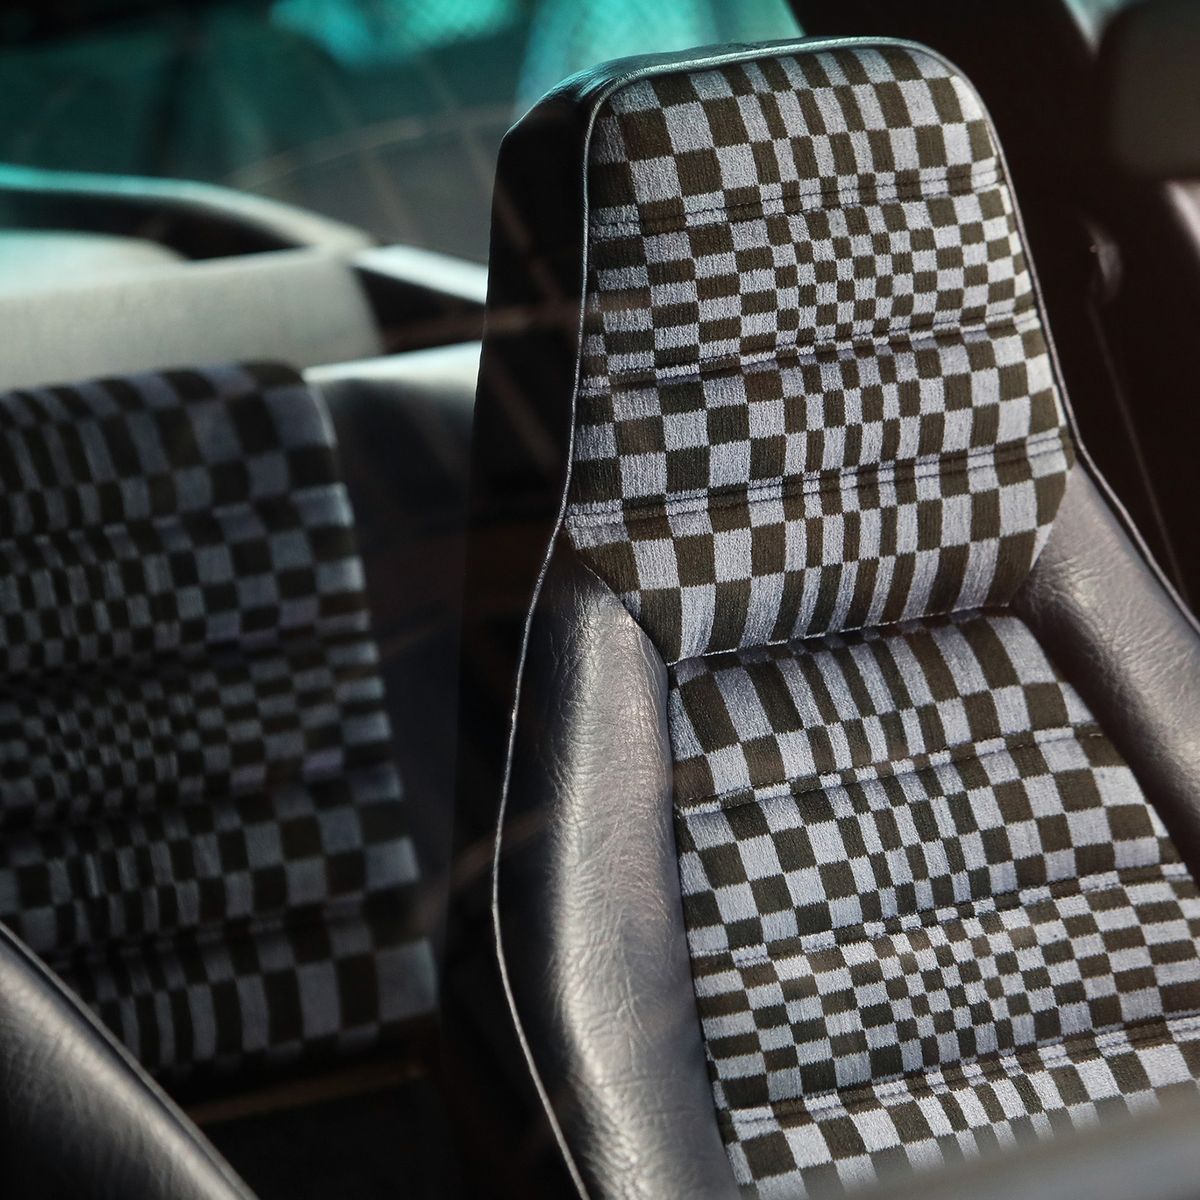 Porsche Is Bringing Back Its Coolest Interior Patterns and